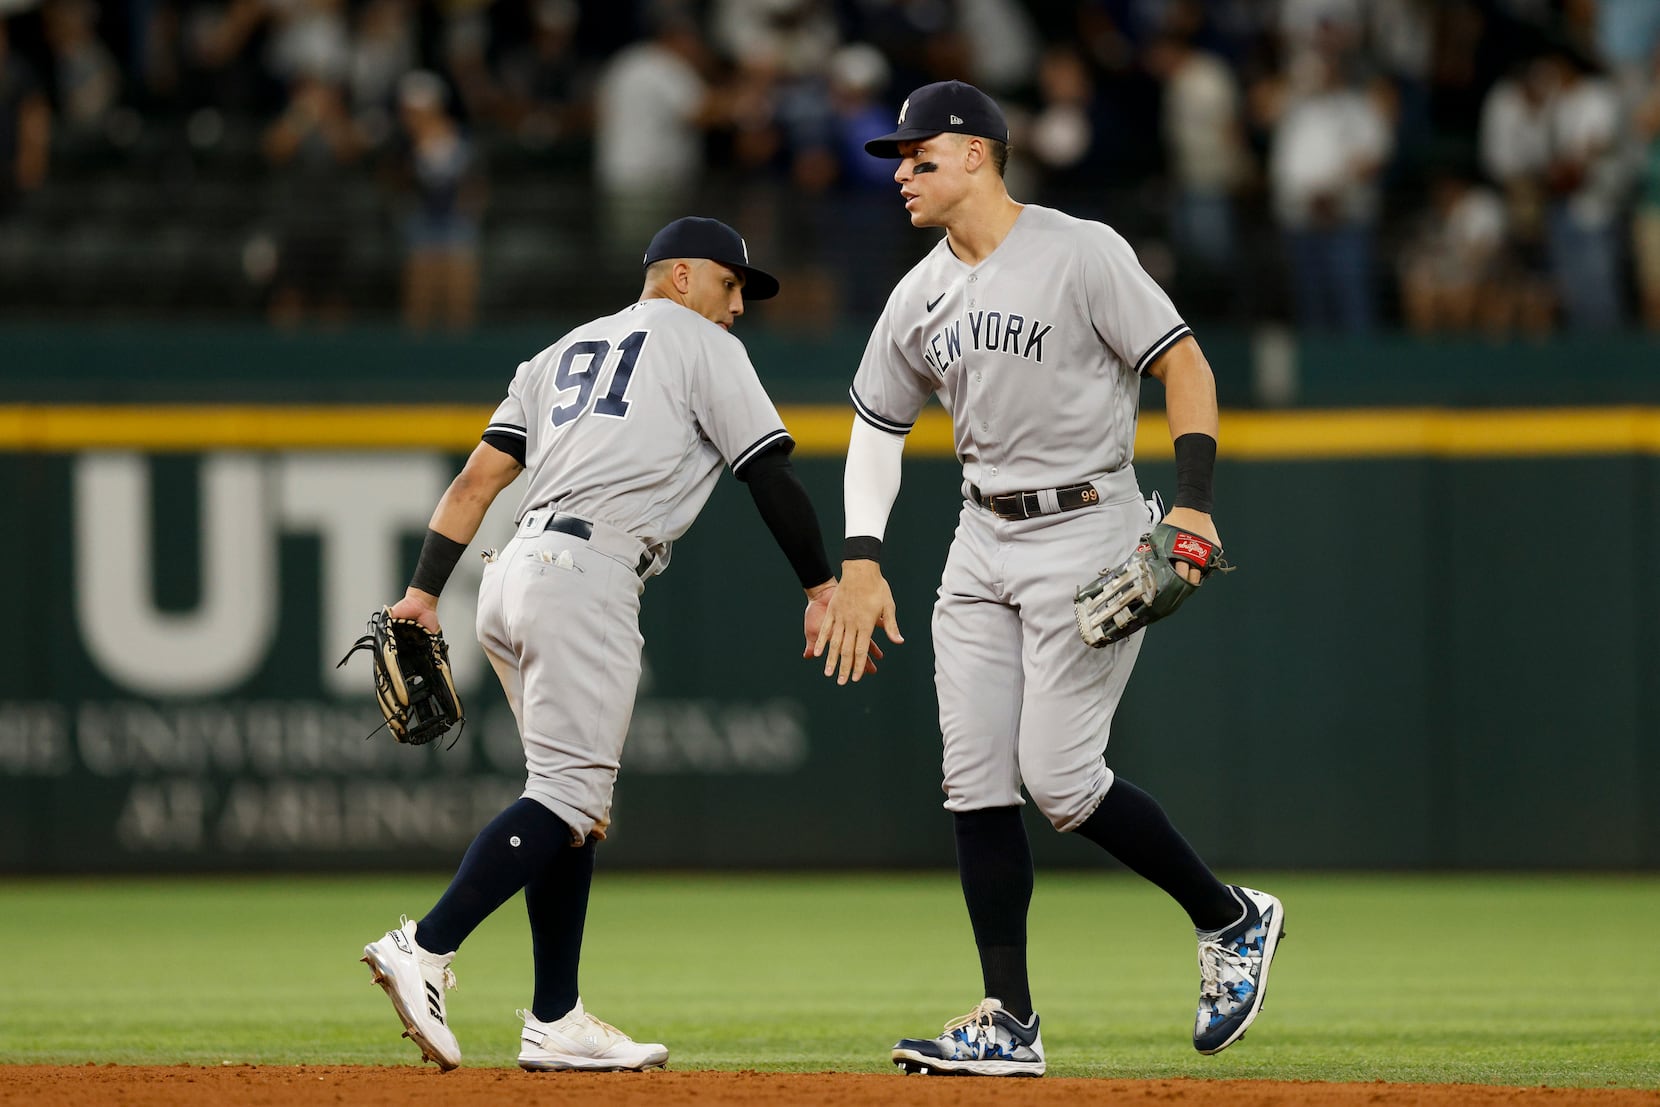 Giancarlo Stanton details Aaron Judge mentality in chase for history